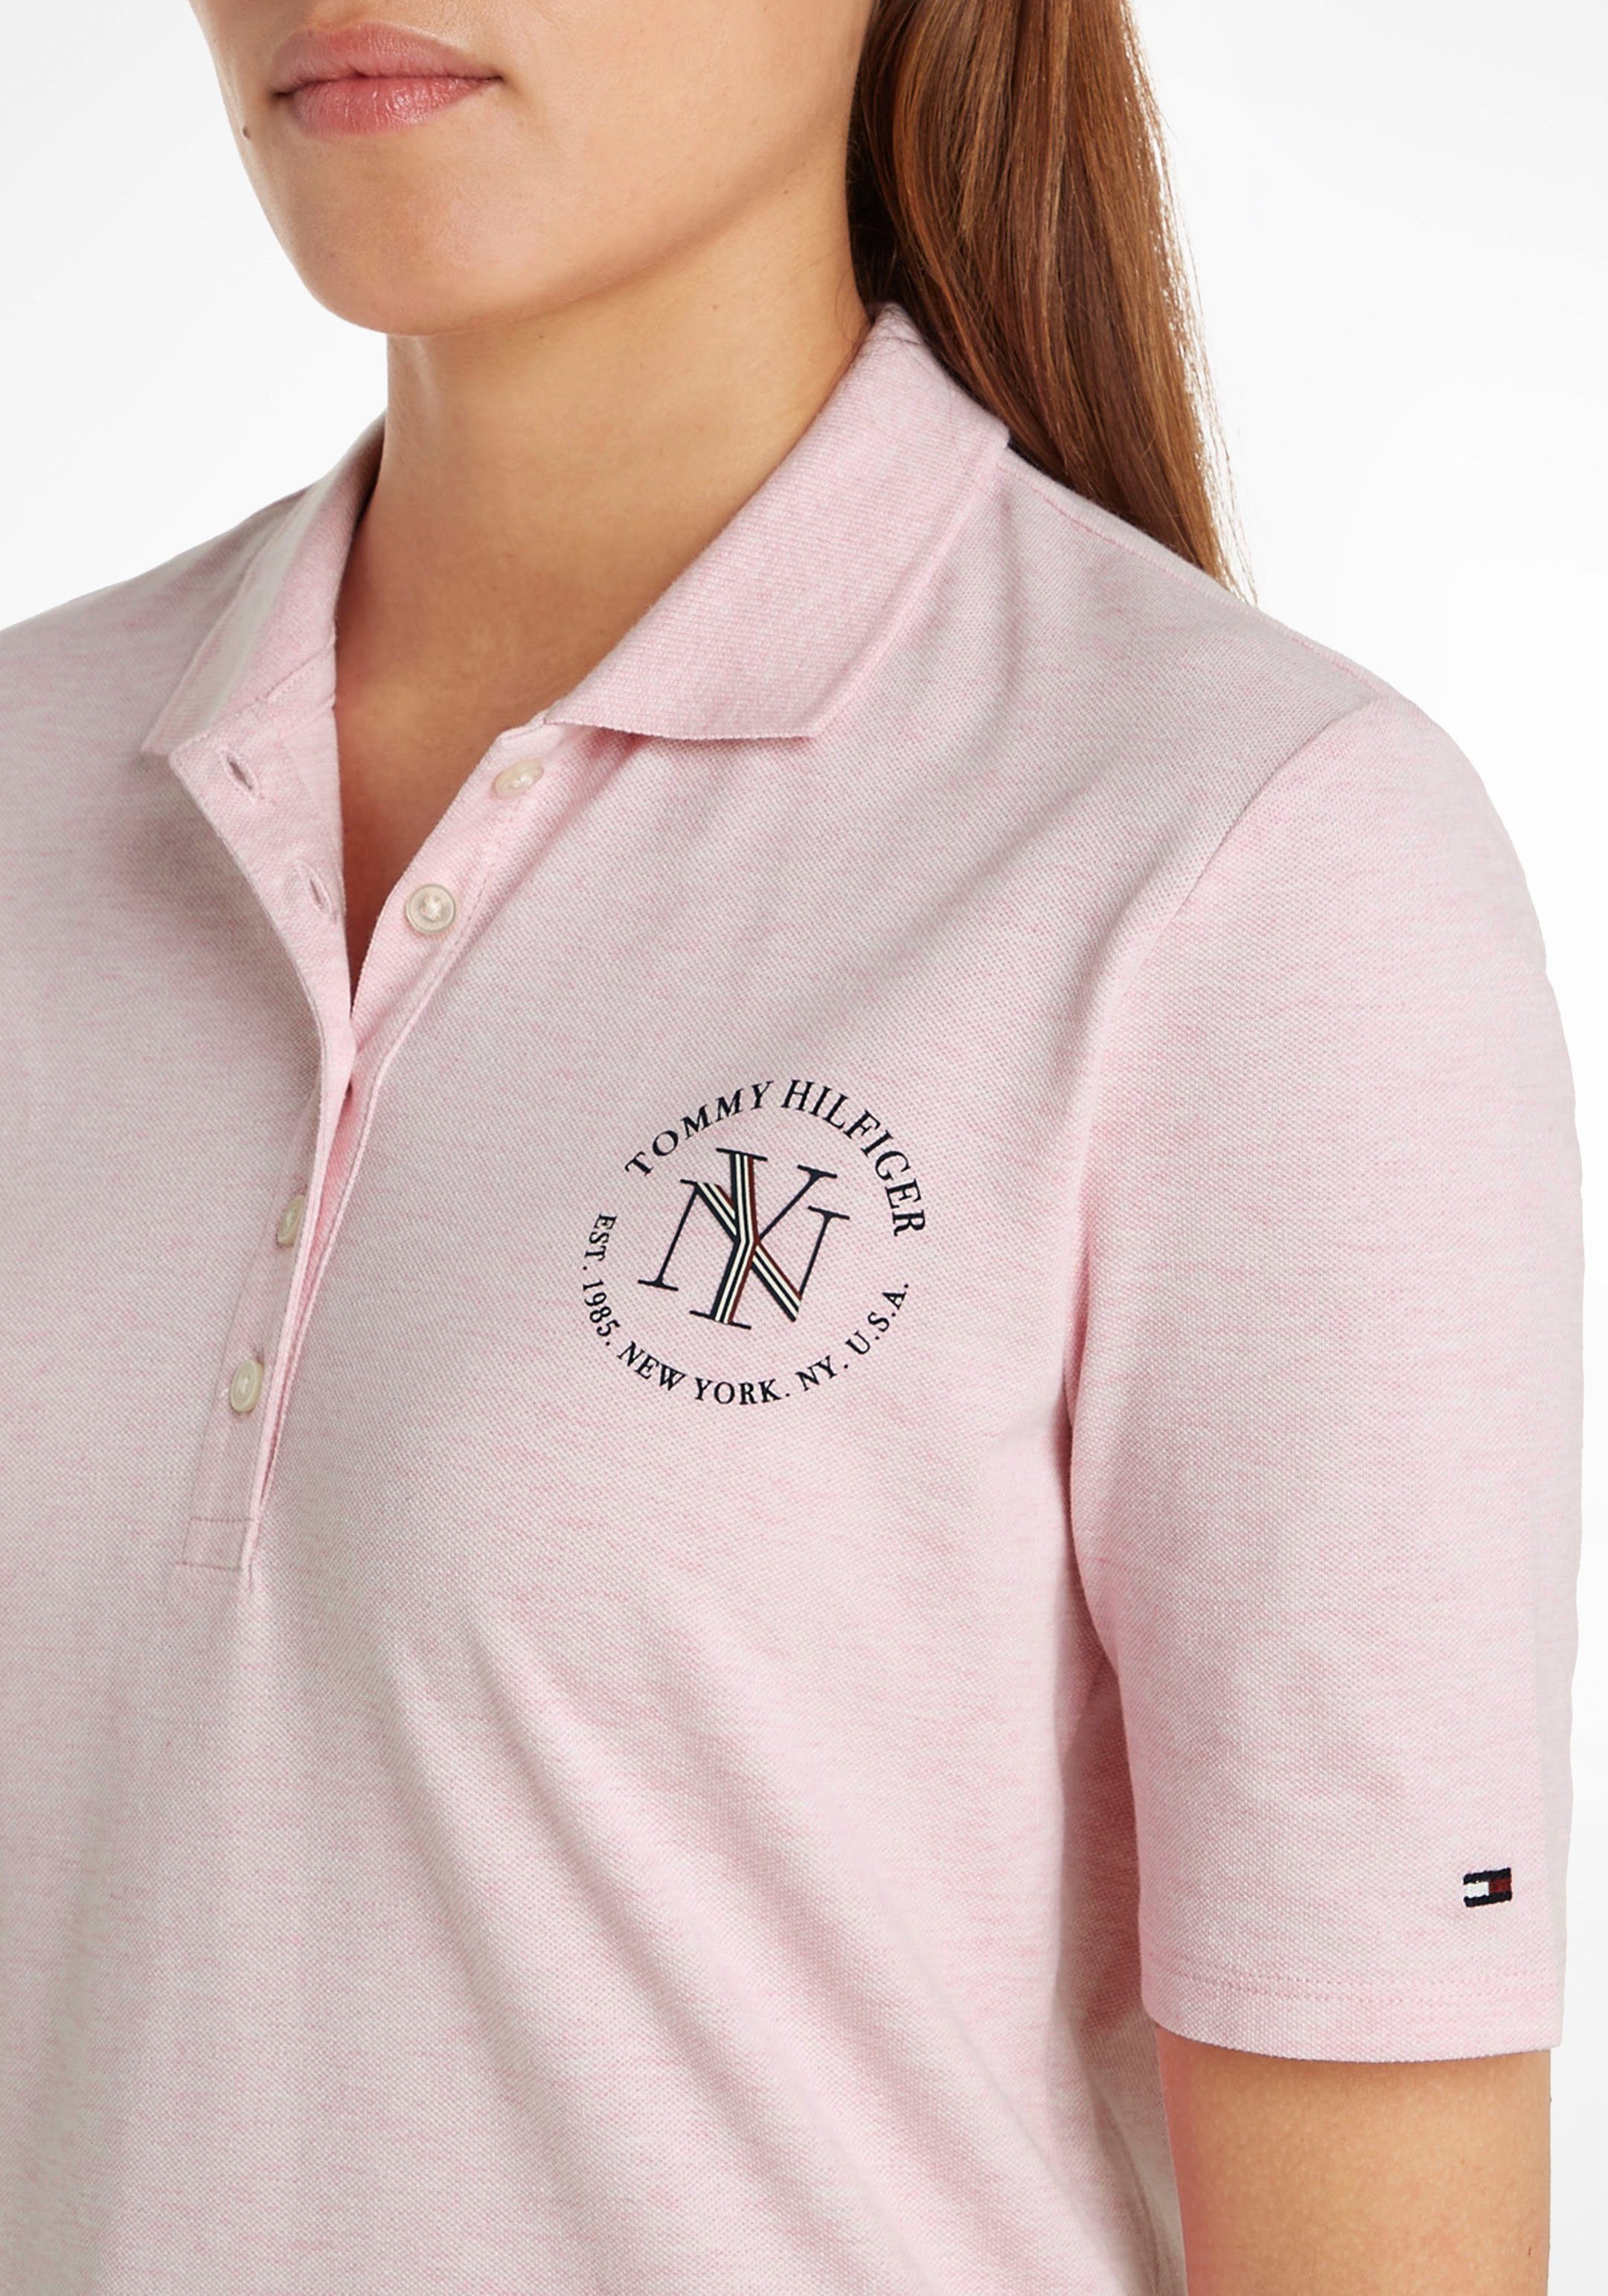 Classic-Pink-Heather POLO ROUNDALL Hilfiger SS mit Poloshirt Tommy NYC Hilfiger REG Tommy Markenlabel